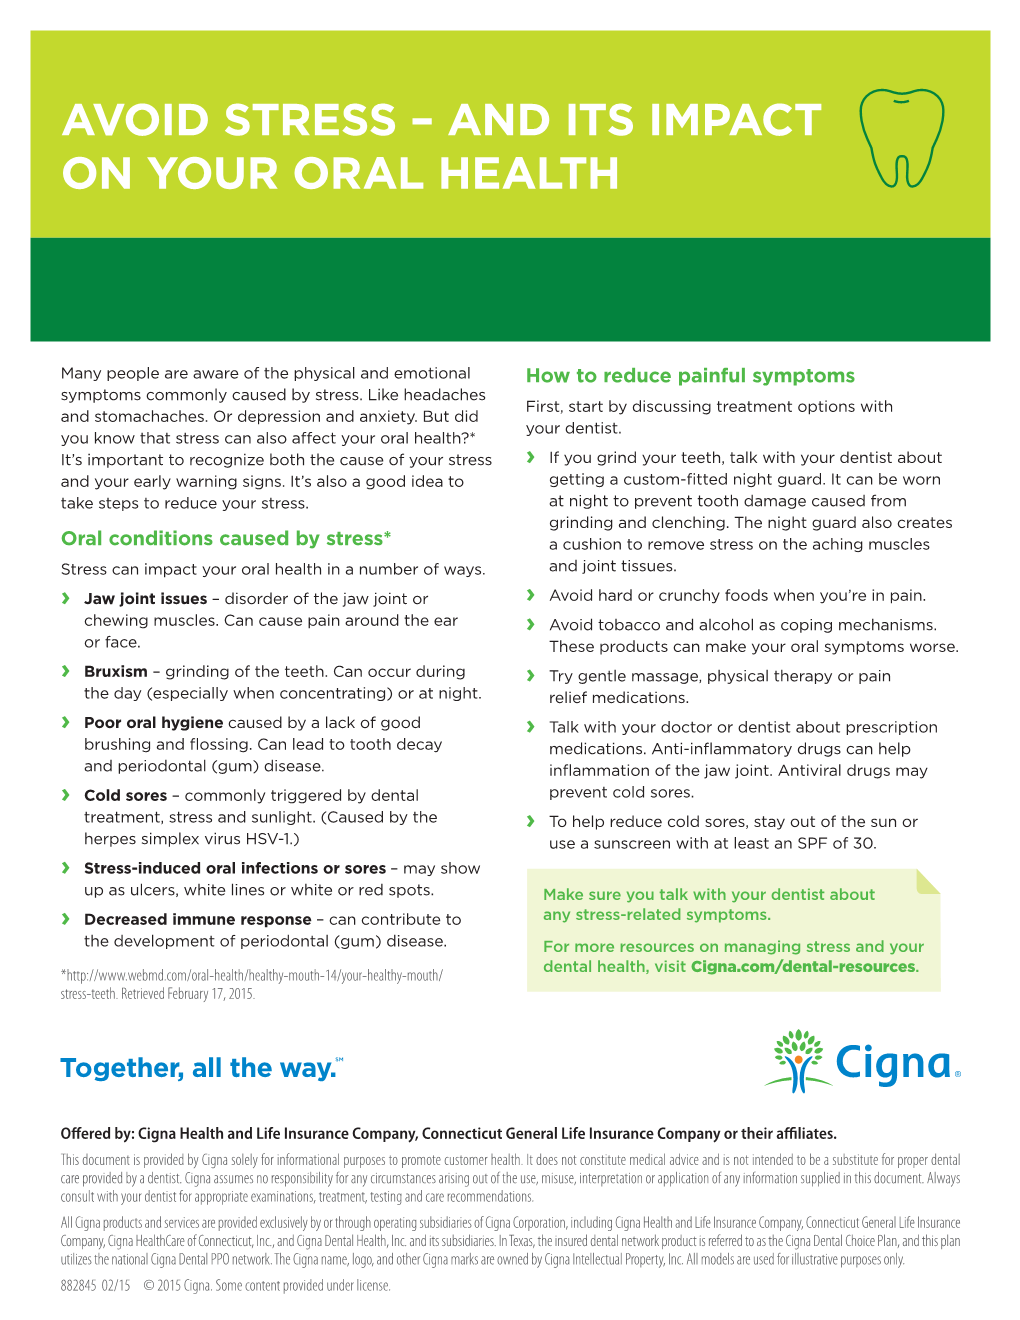 Avoid Stress – and Its Impact on Your Oral Health